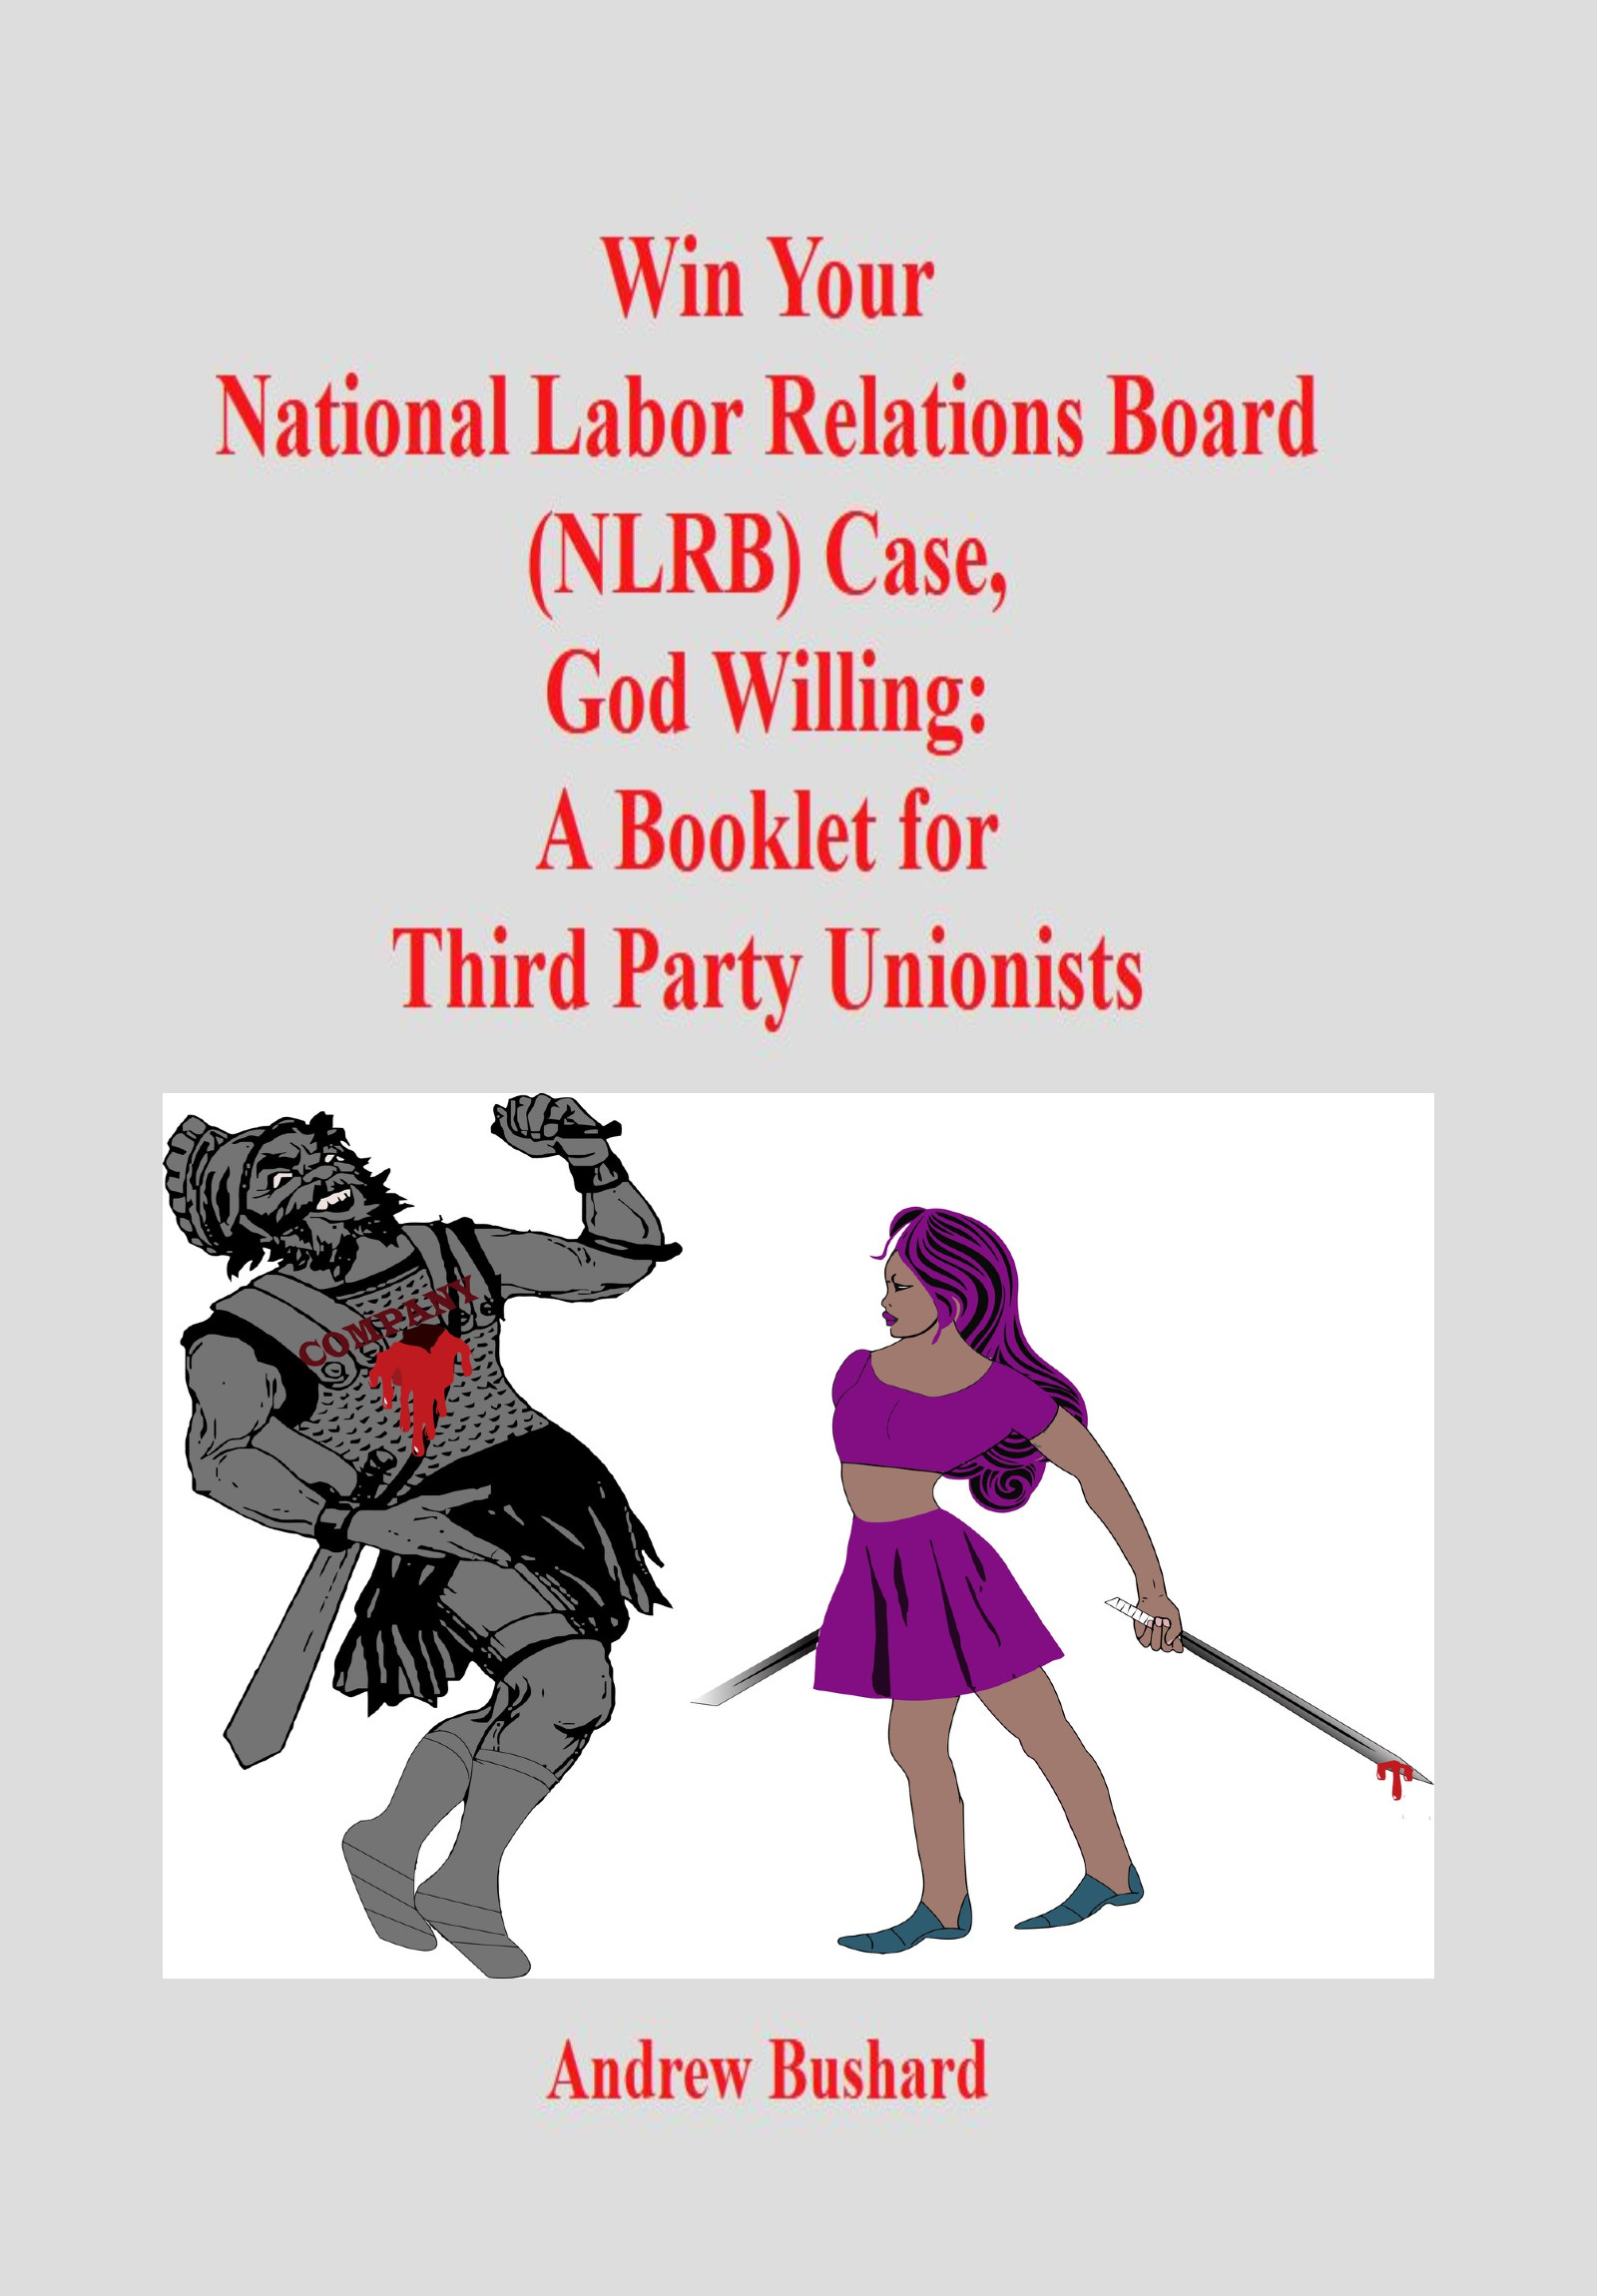 Win Your National Labor Relations Board (NLRB) Case, God Willing: A Booklet for Third Party Unionists's featured image